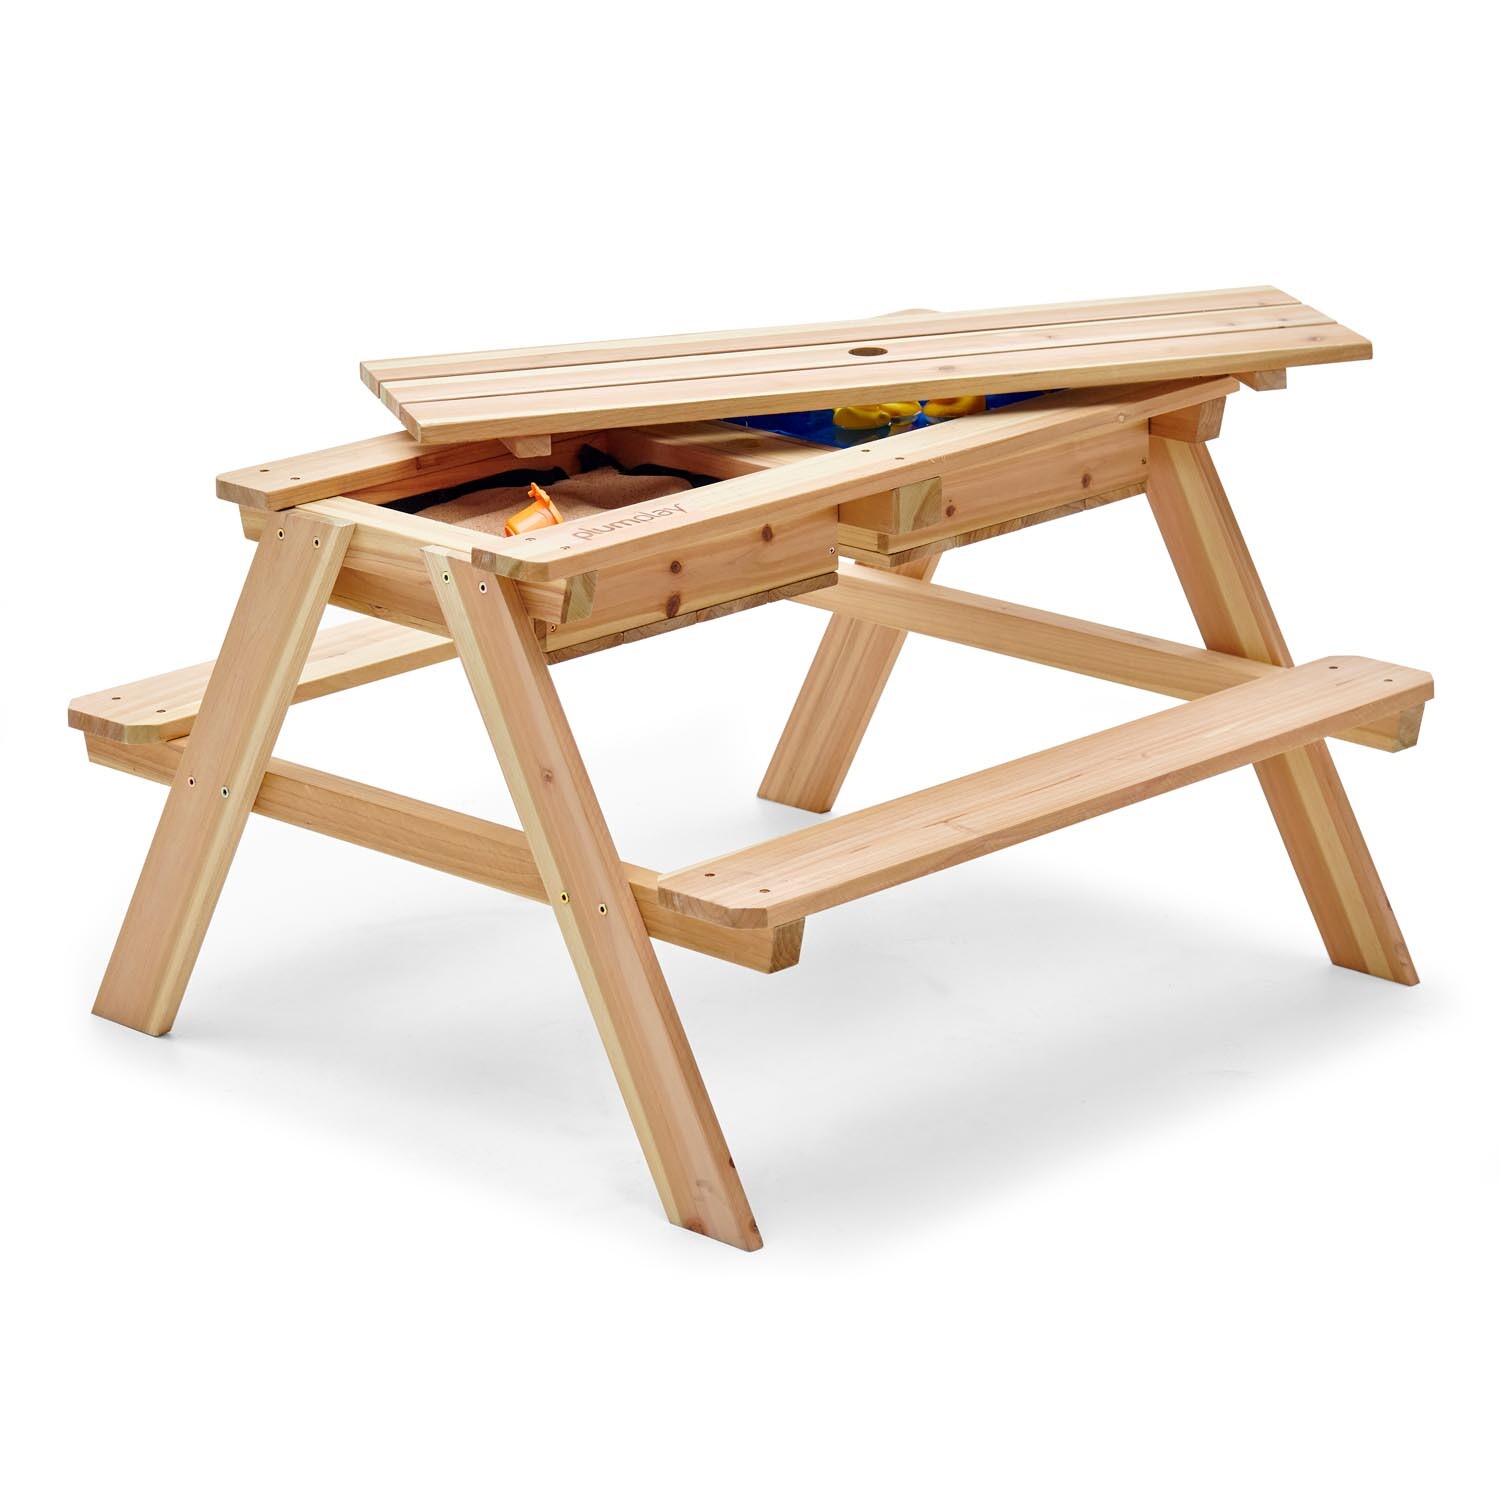 Wooden Sand & Water Picnic Table - Brown Image 12